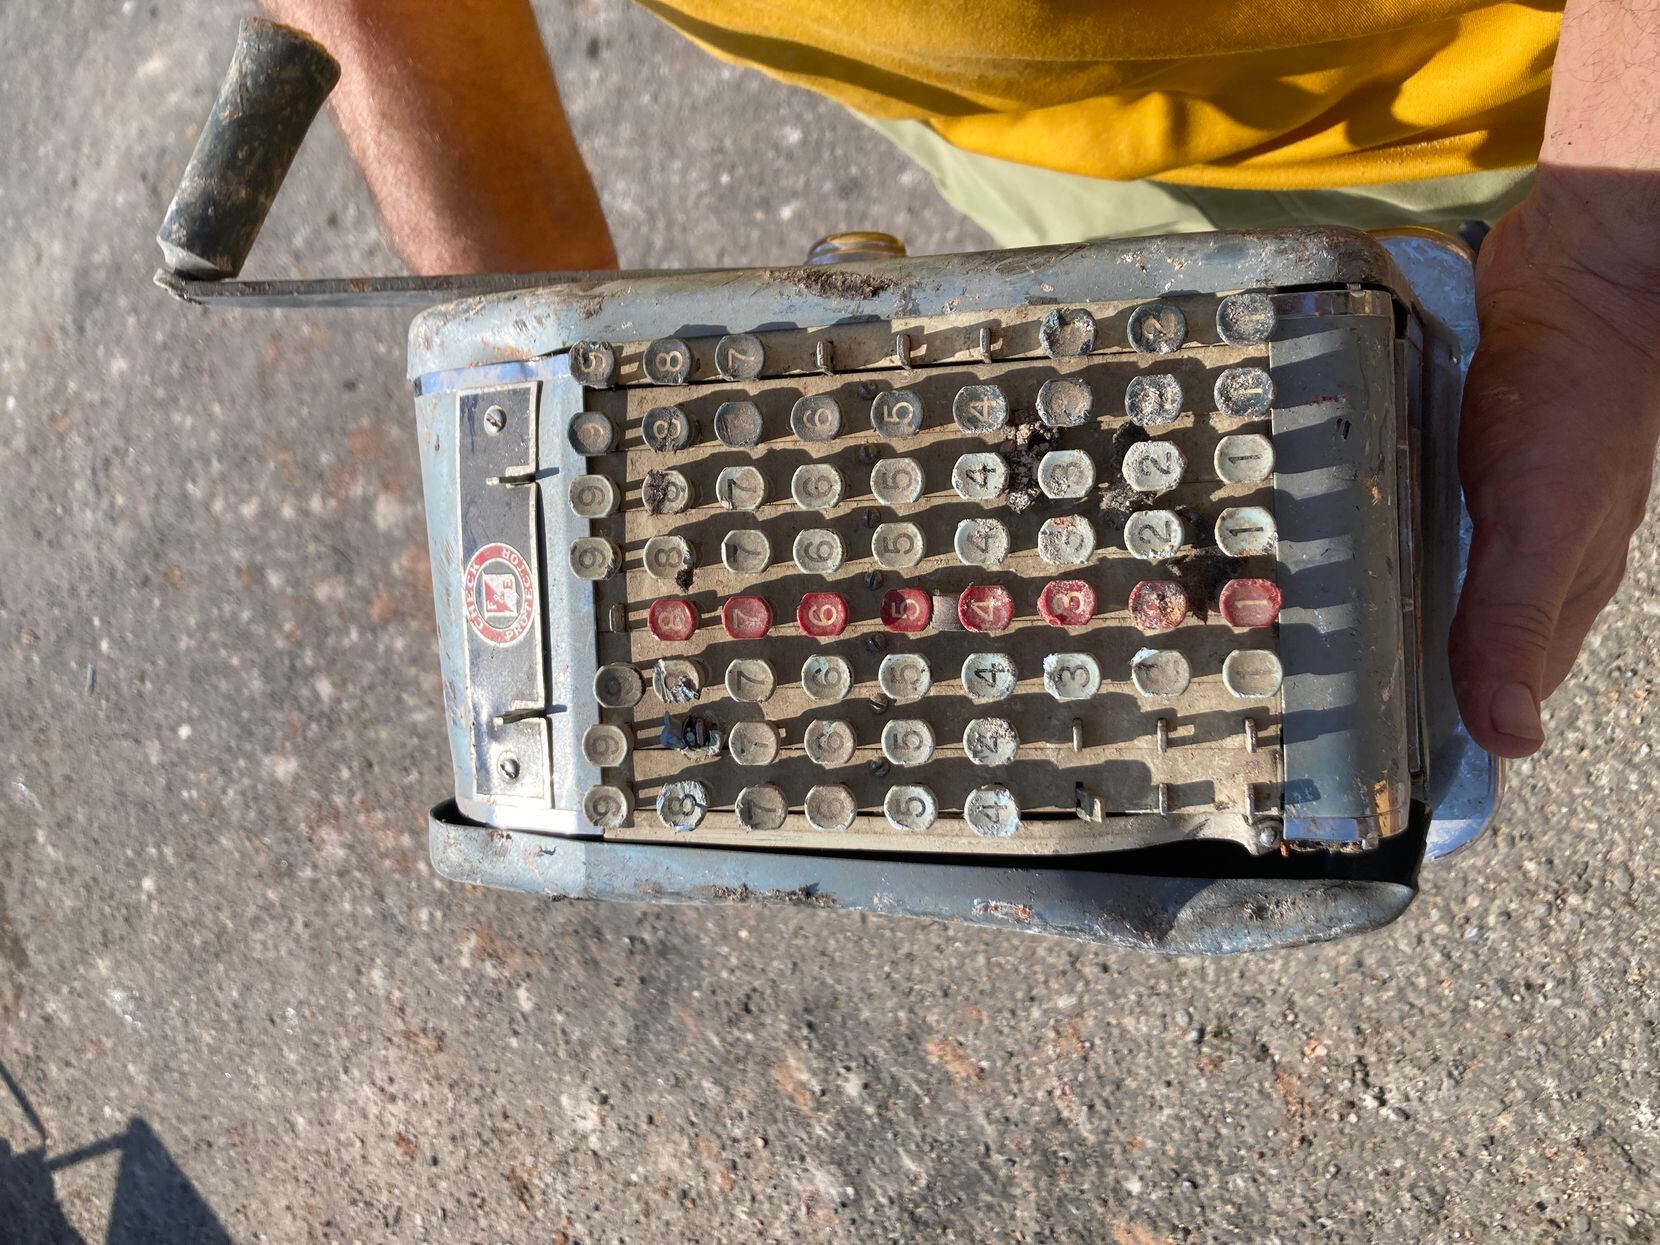 An old manual check machine pulled from the debris after the city of Melissa demolished...